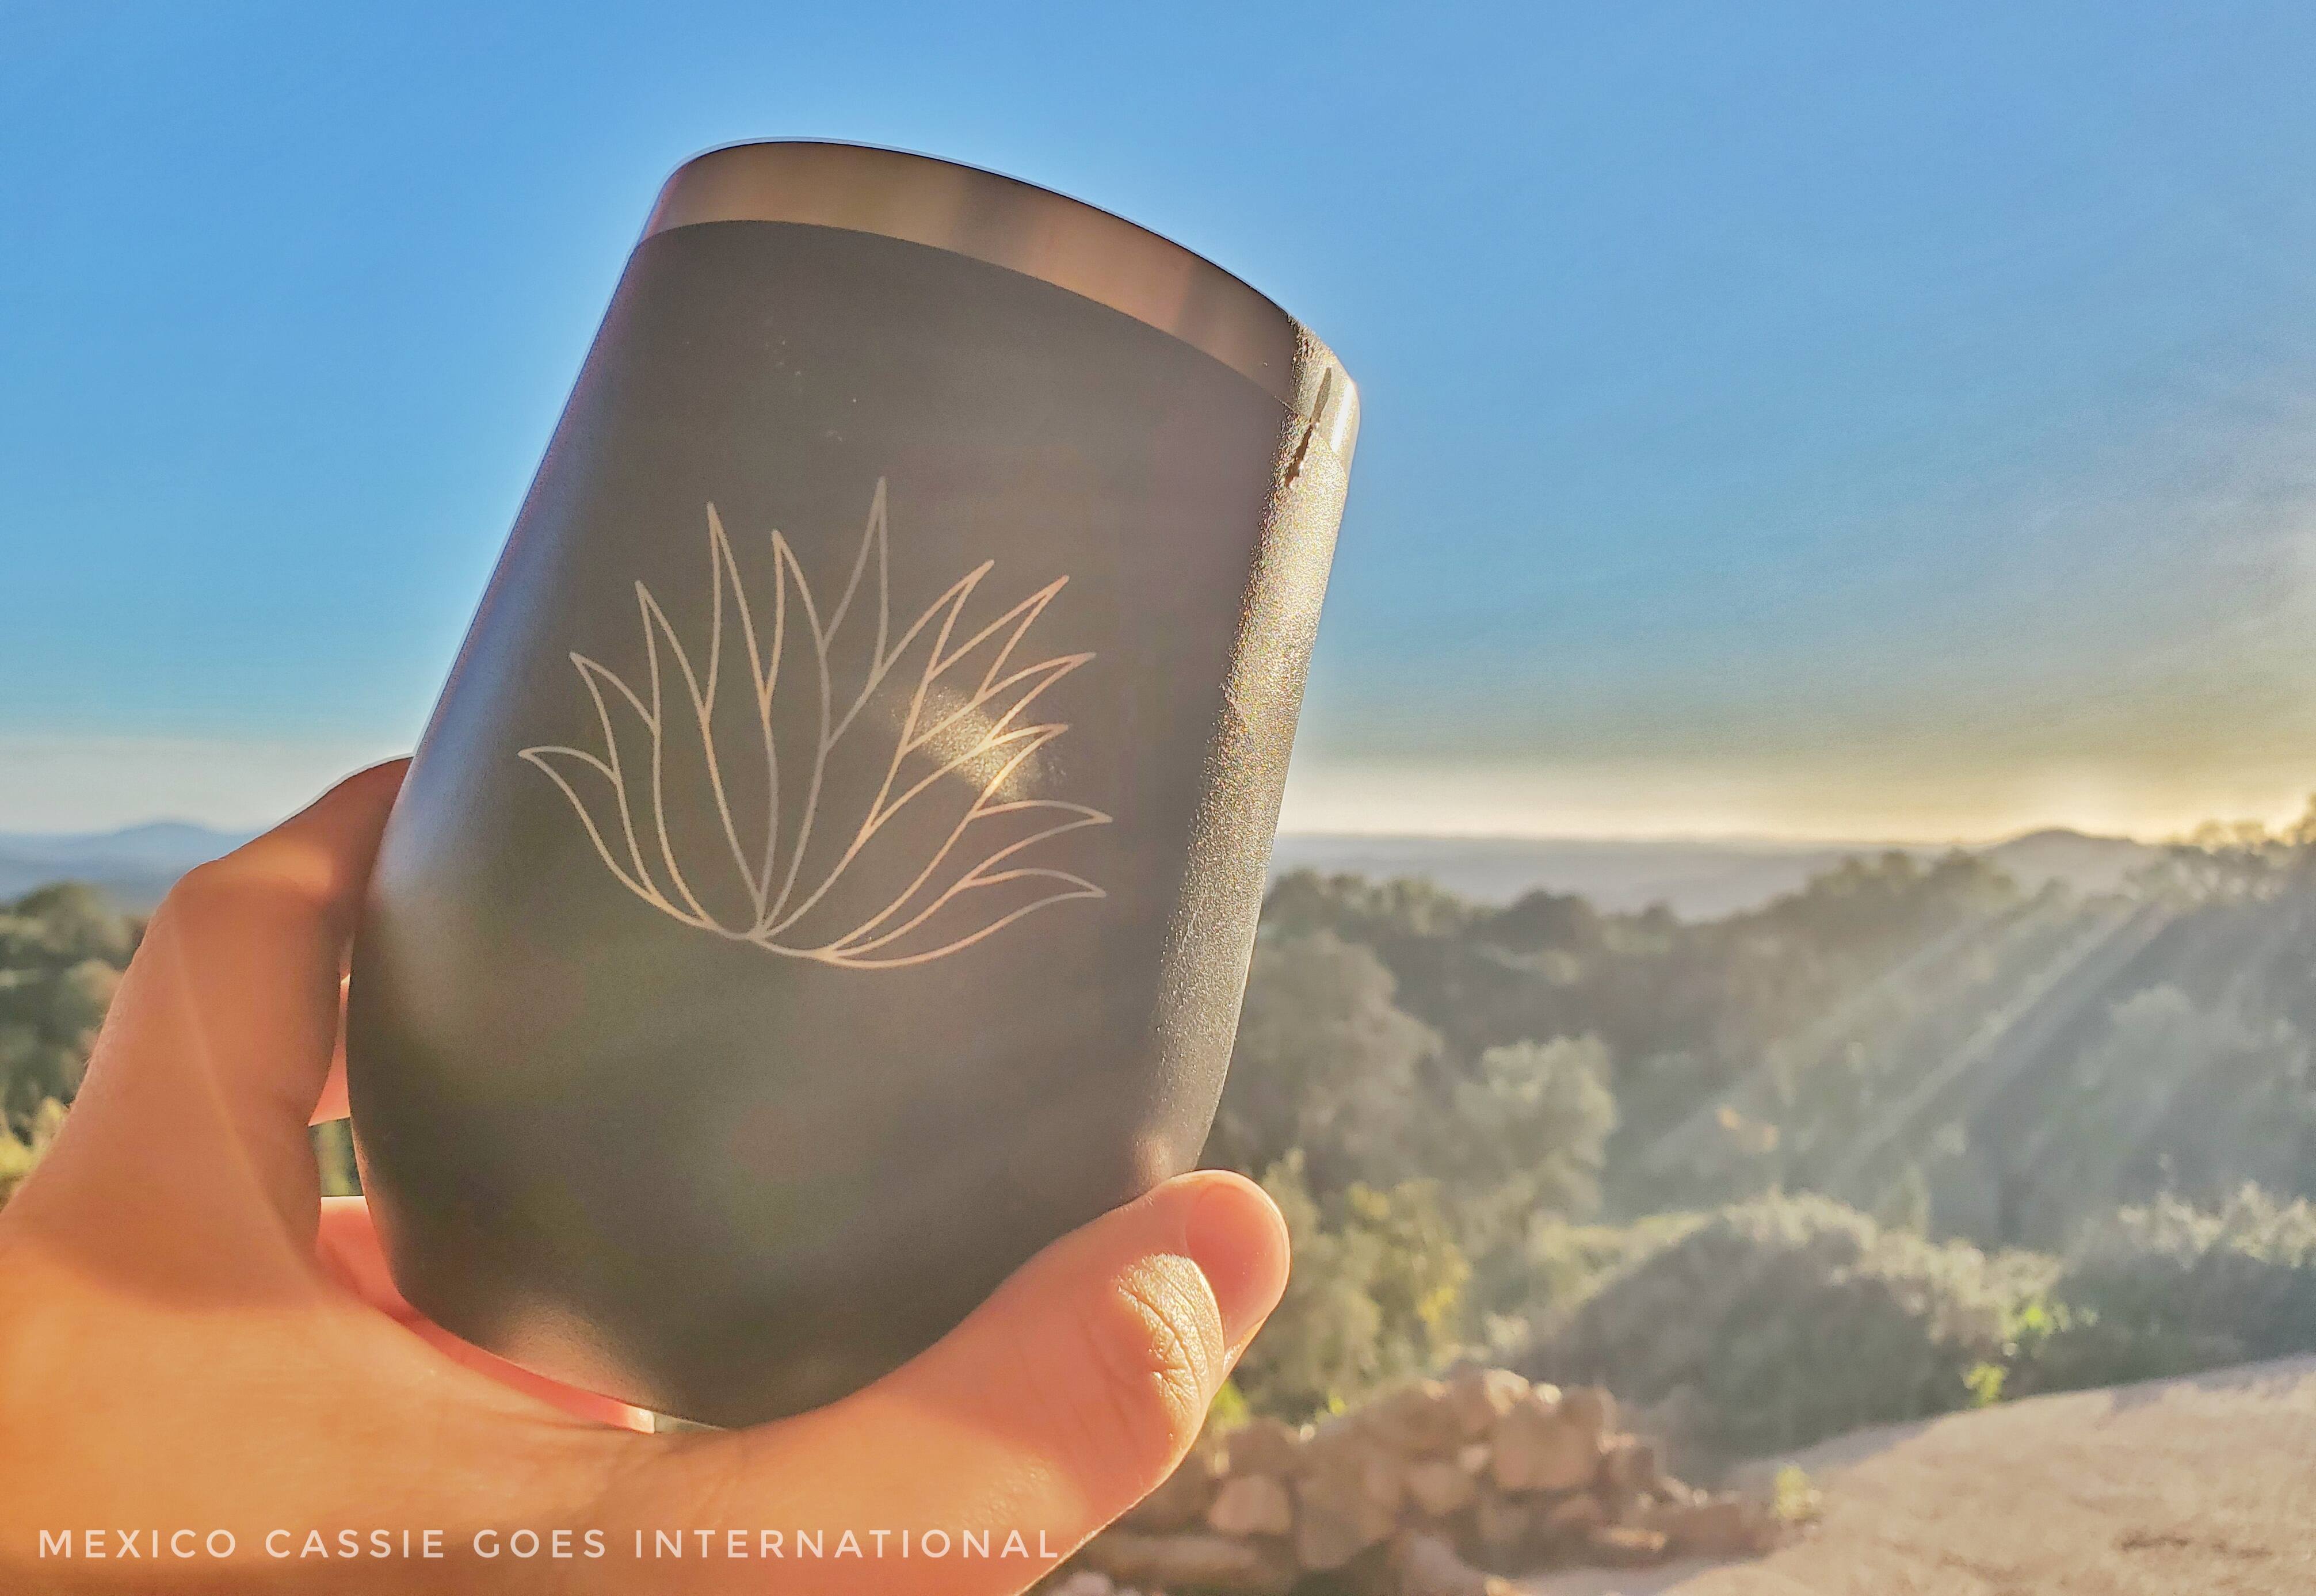 reusable mug held up against beautiful vista - sunset light shining gently. mug is navy blue with silver rim and a silver engraved agave plant